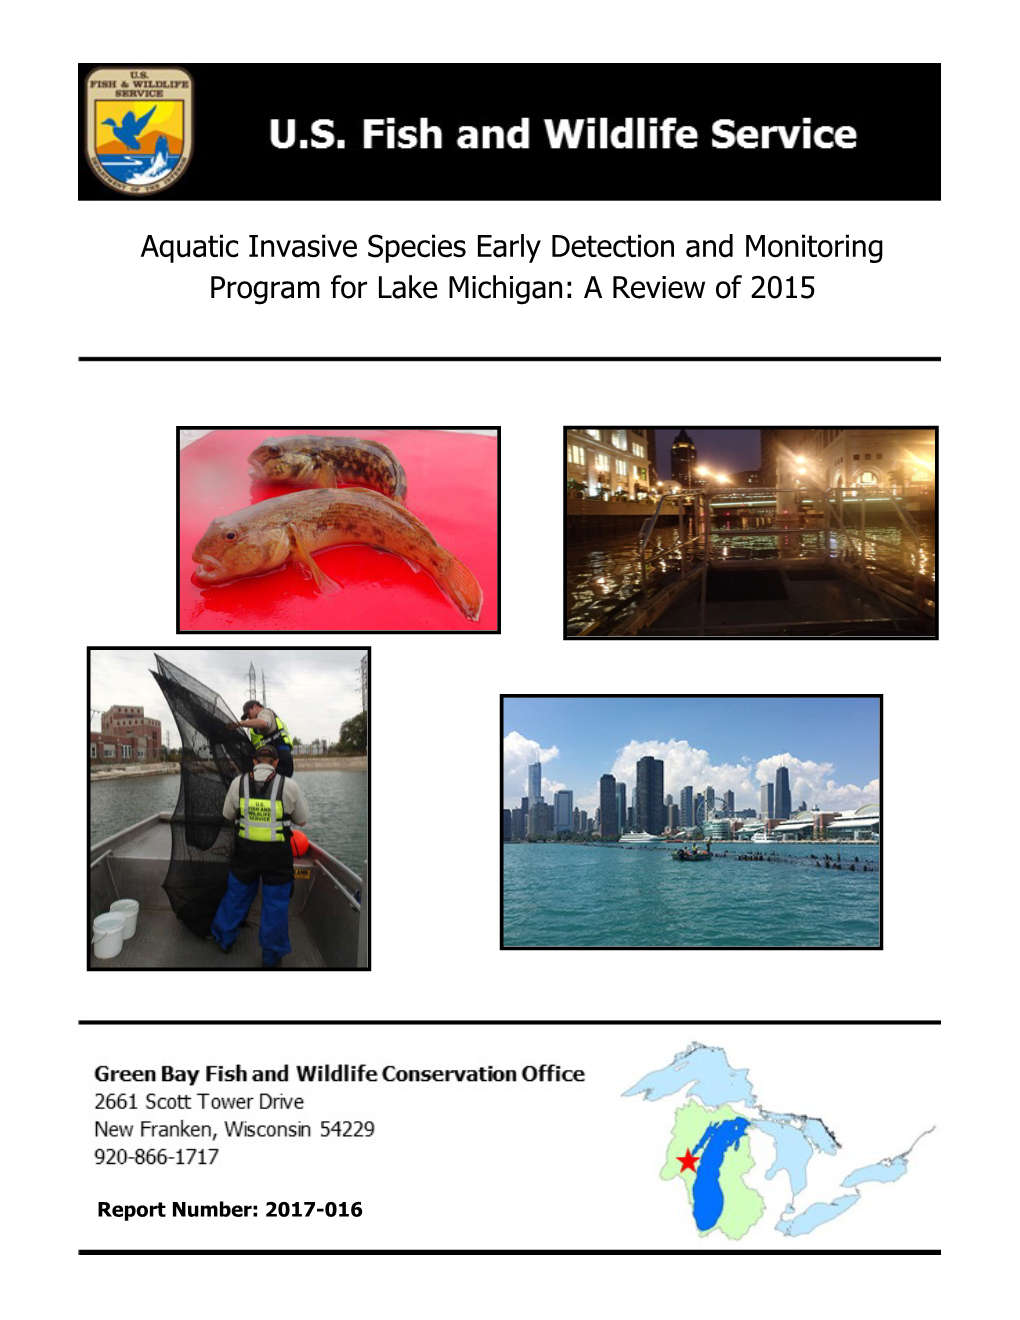 Aquatic Invasive Species Early Detection and Monitoring Program for Lake Michigan: a Review of 2015